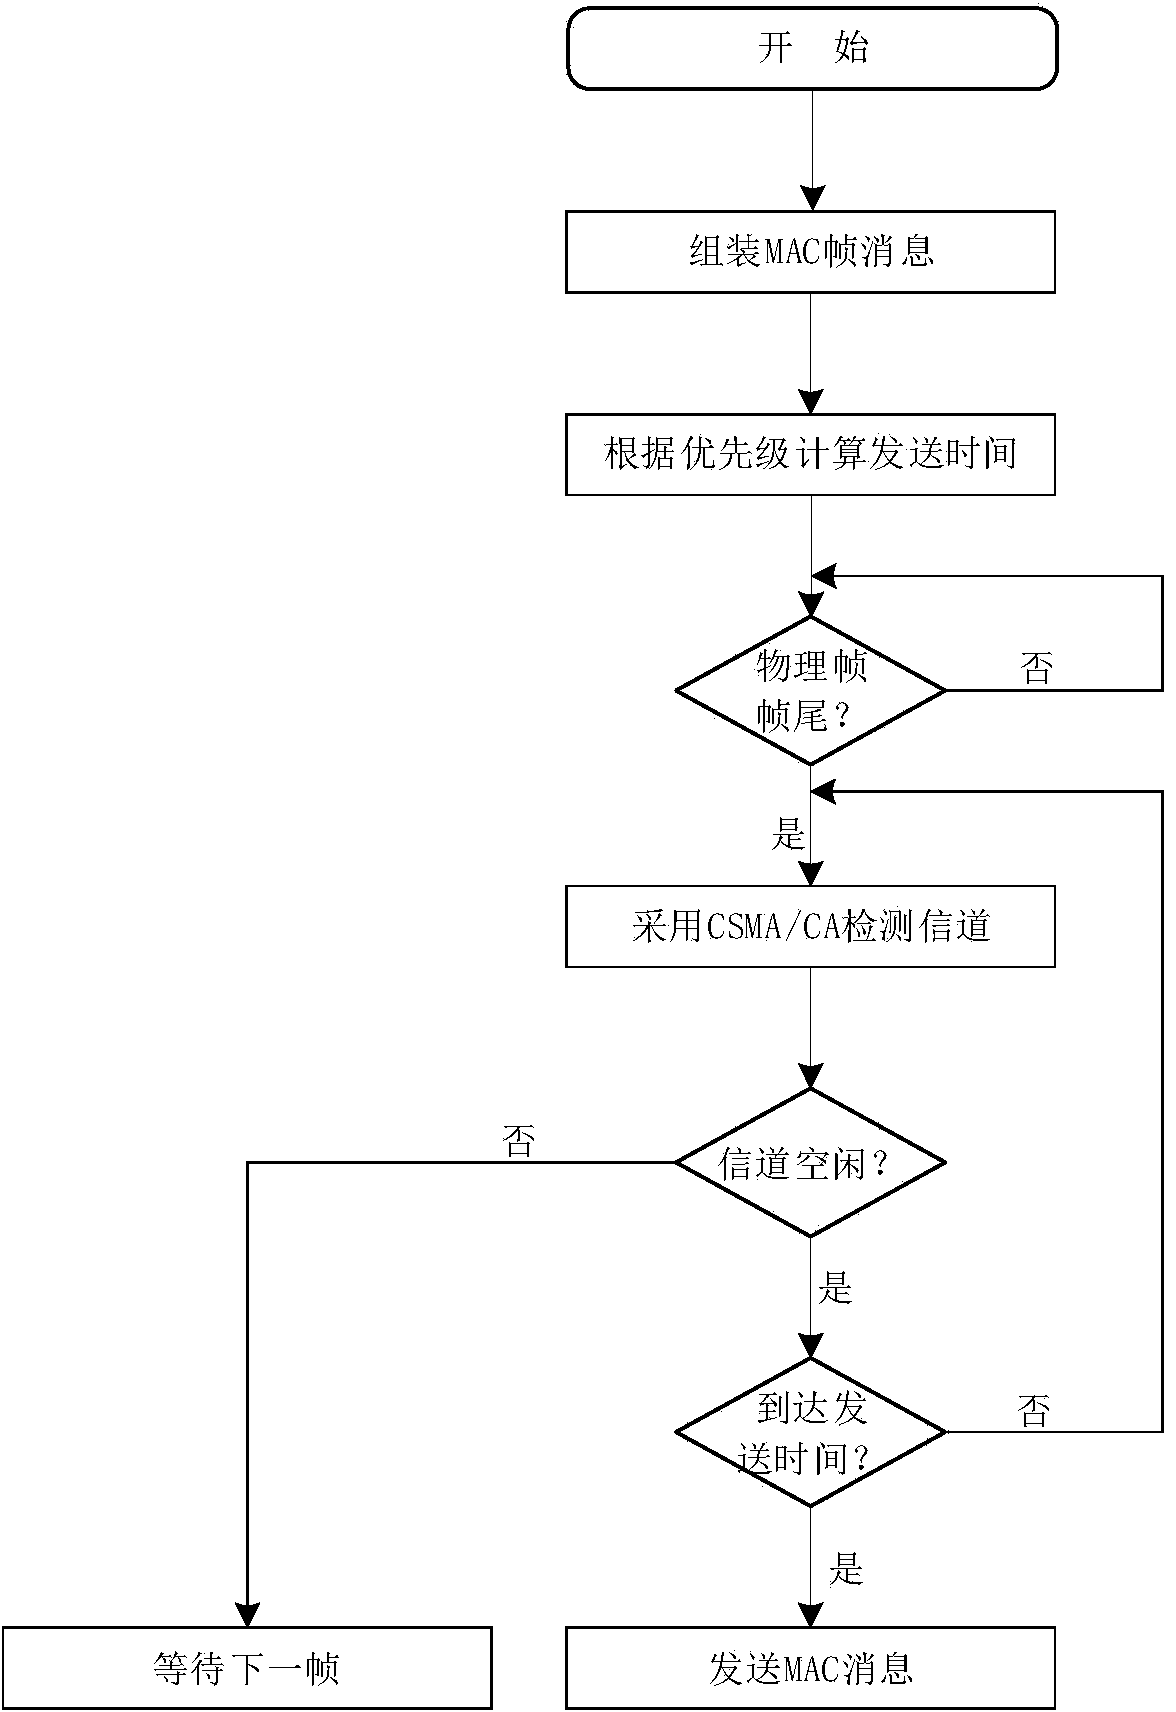 Electric wireless private network channel access control method based on service classification